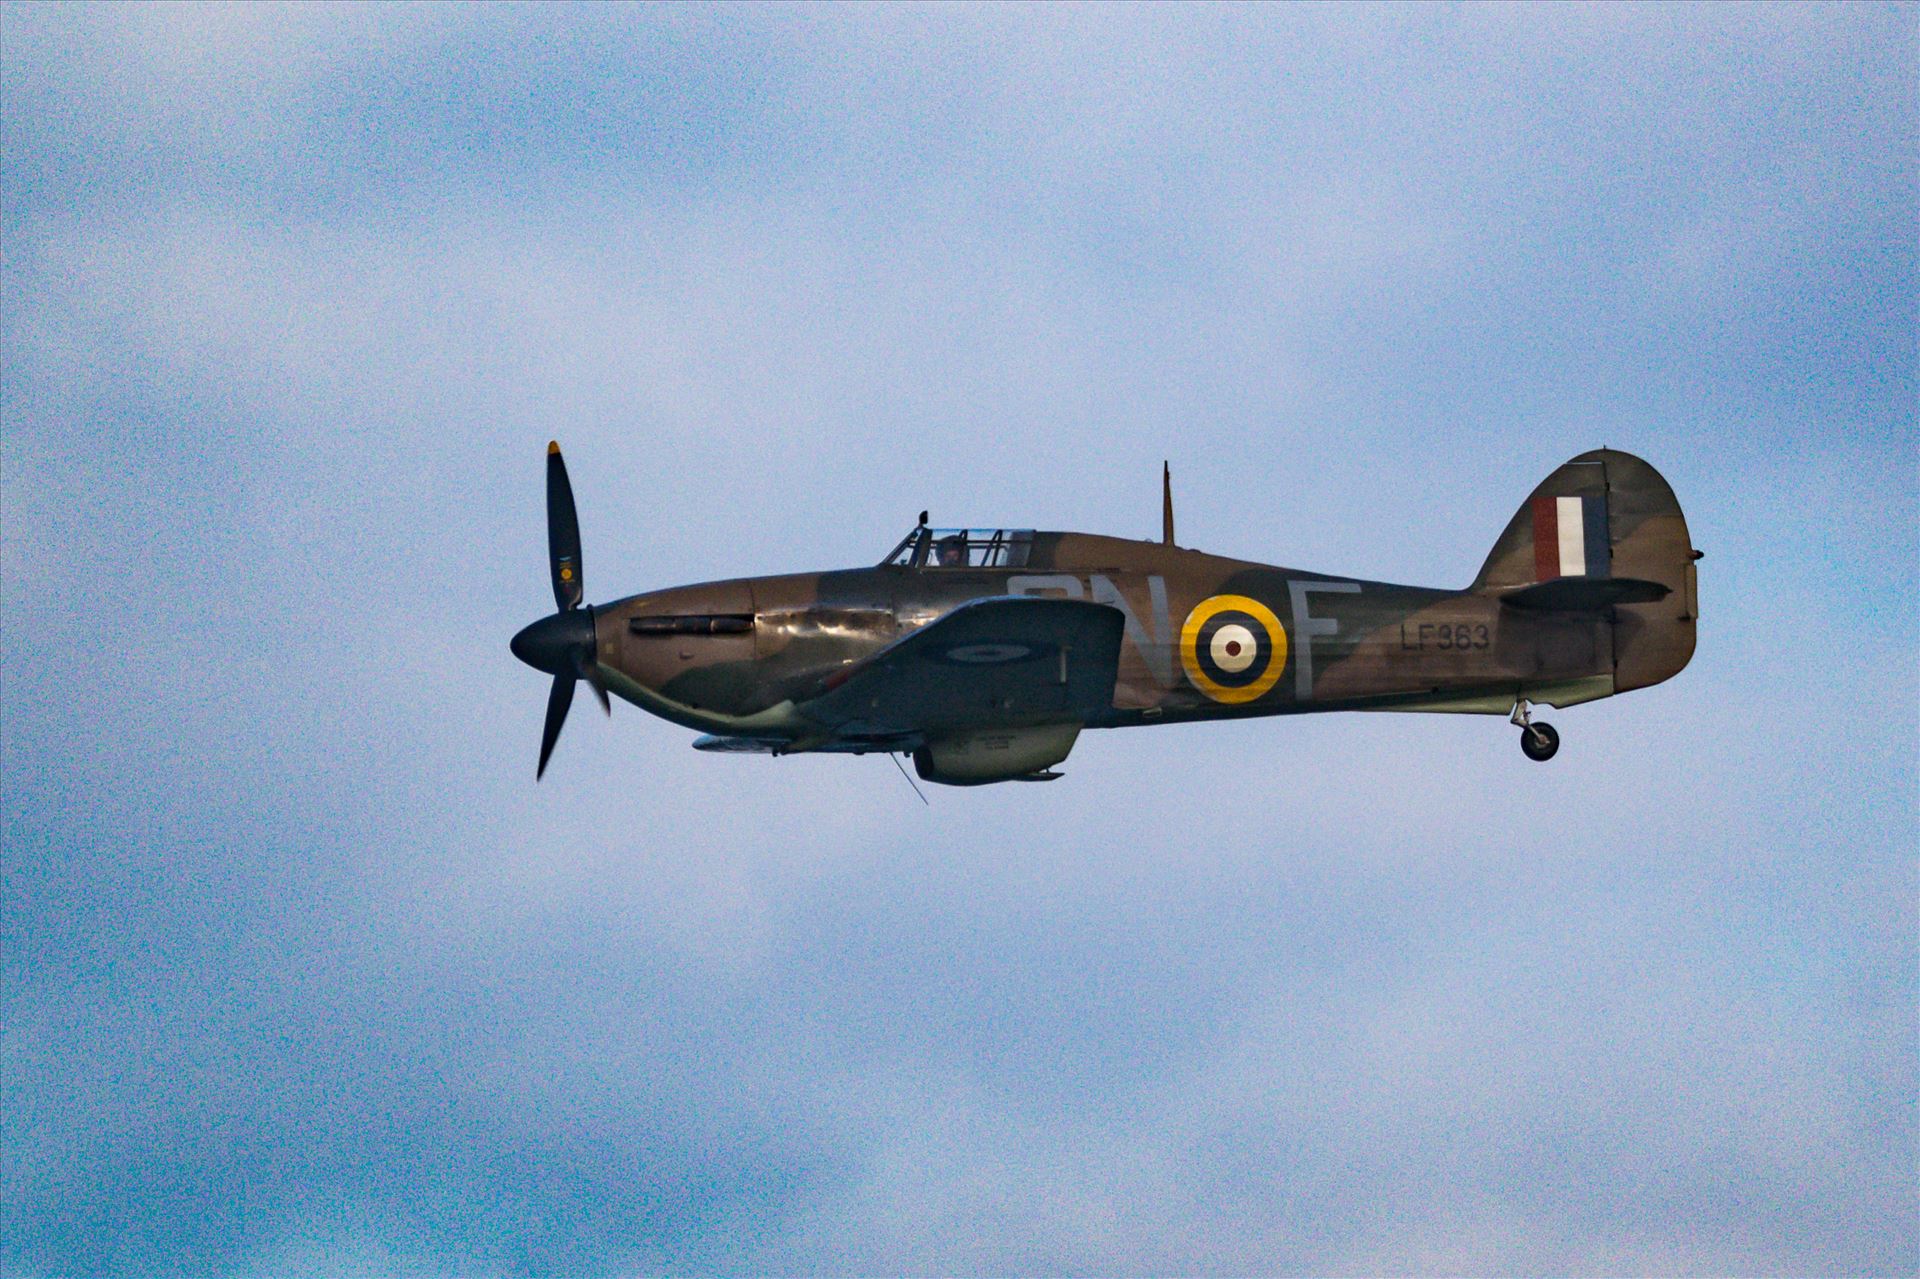 RAF Spitfire Fly By - Taken in 2017 at Sunderland International Airshow by AJ Stoves Photography